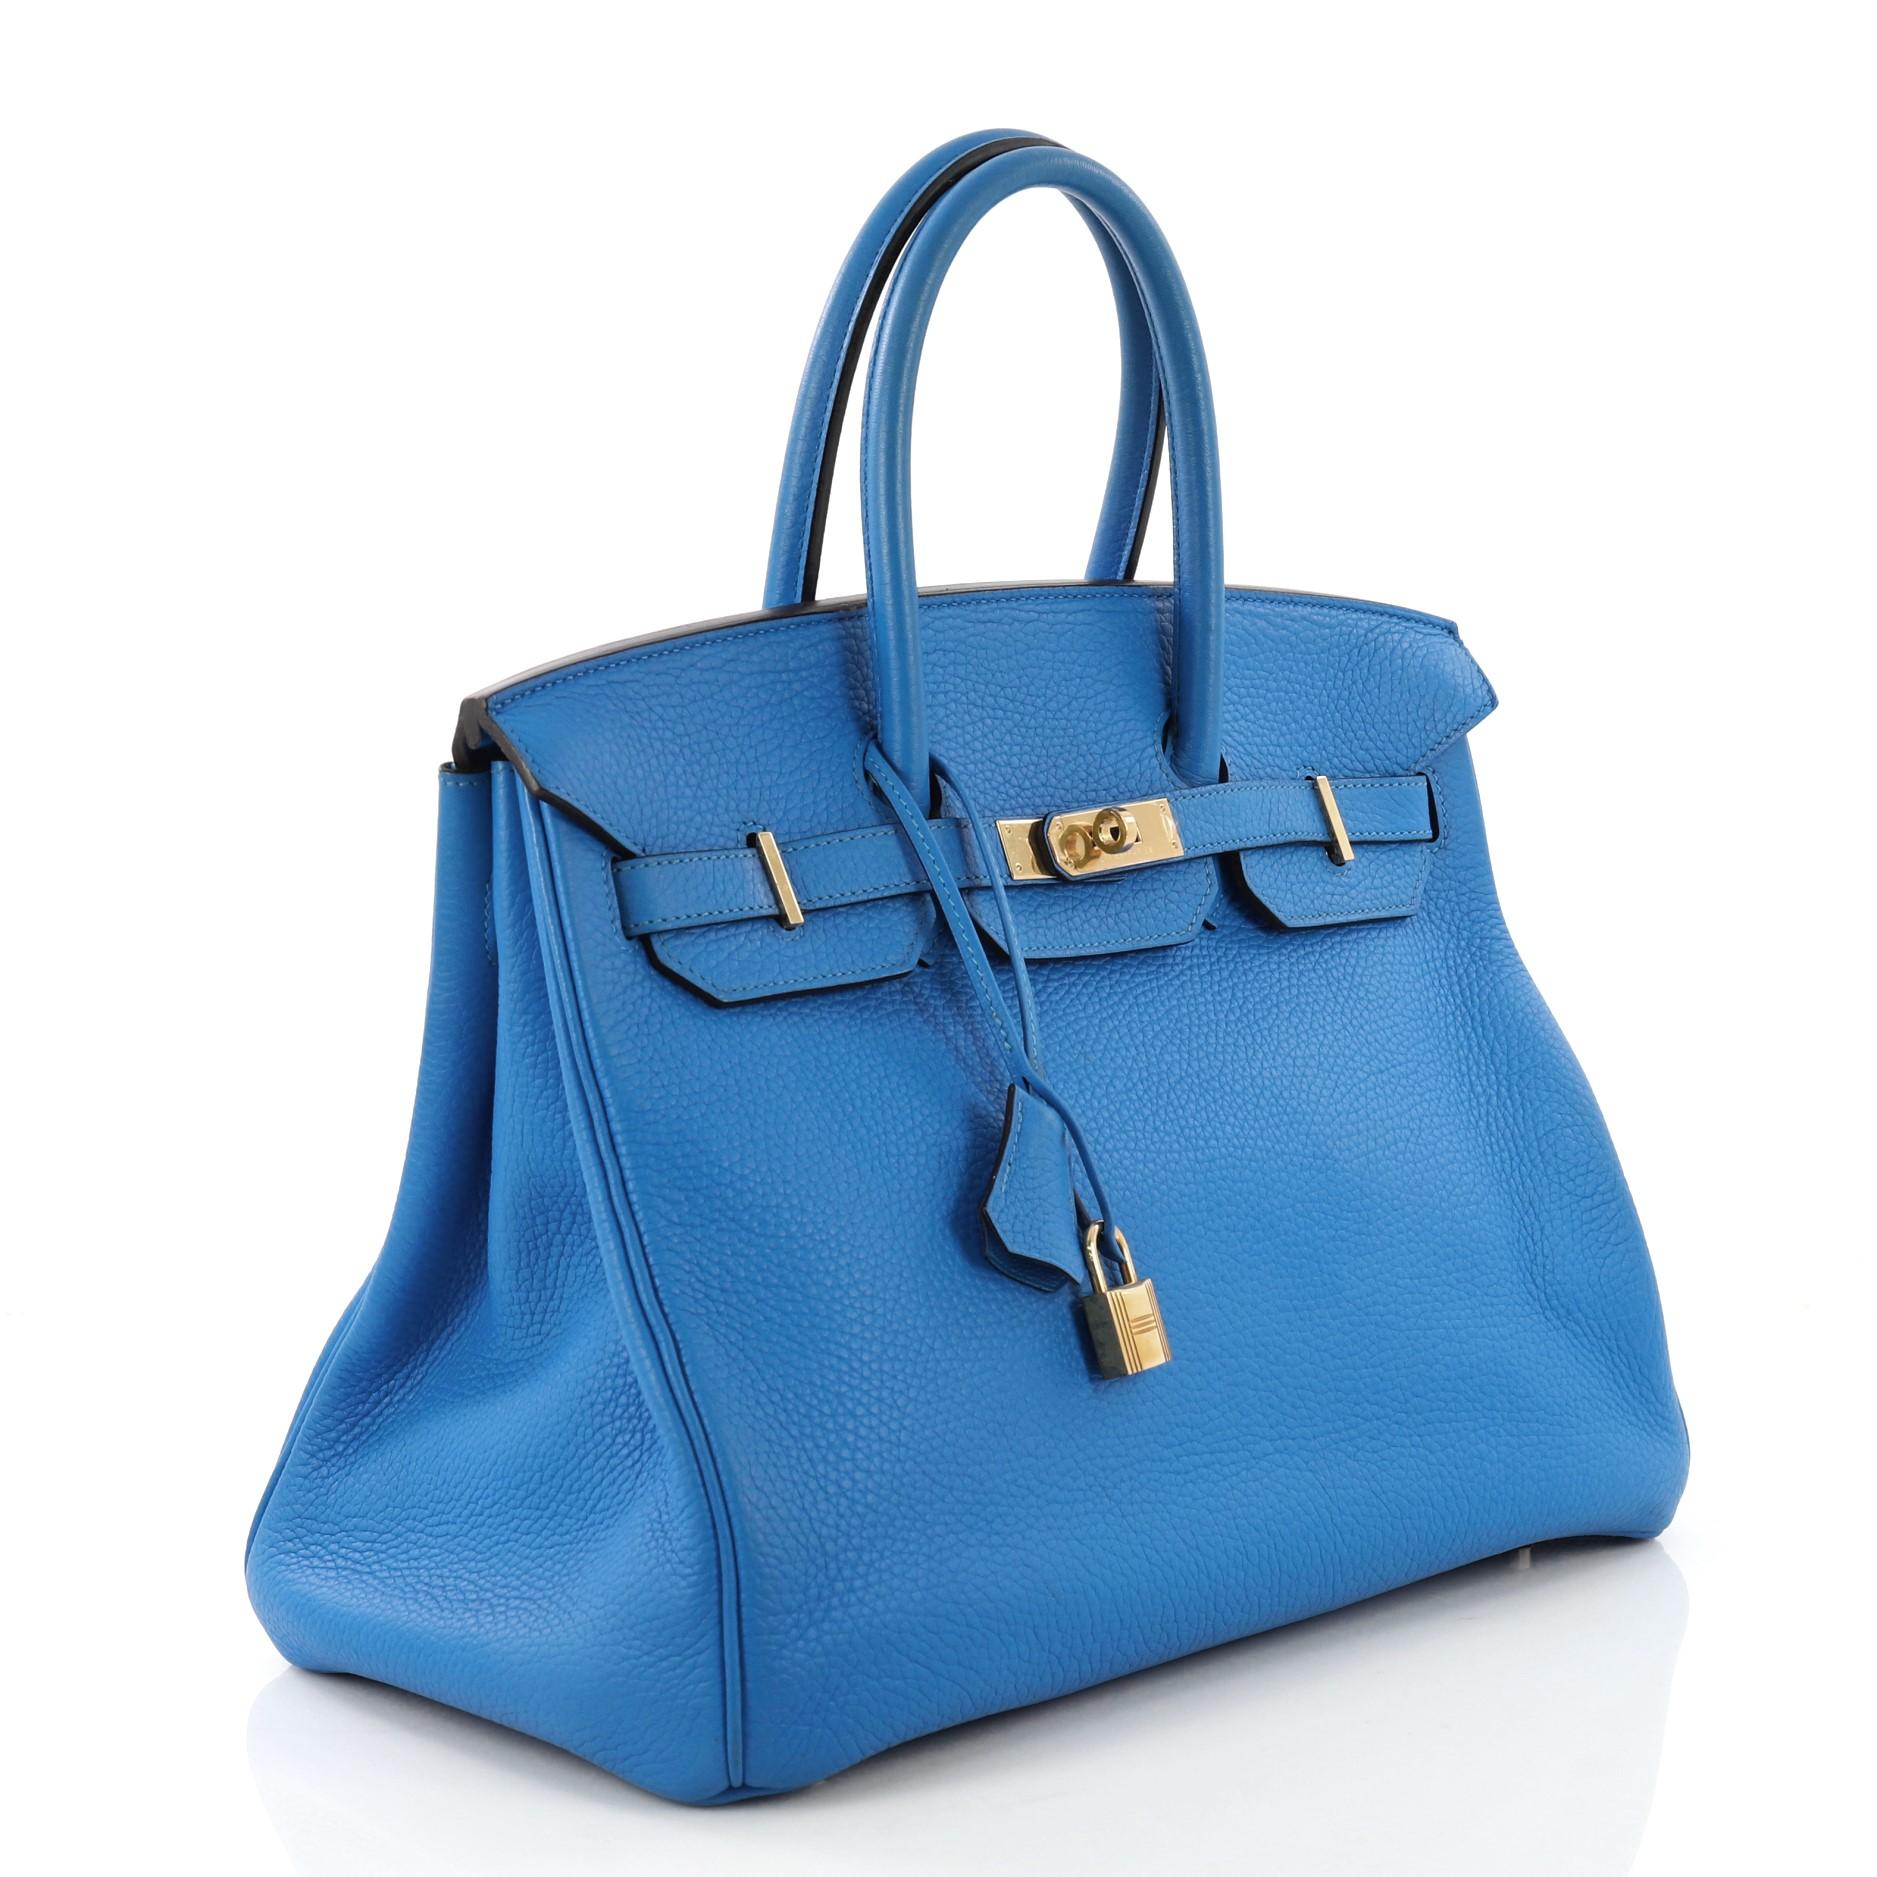 This Hermes Birkin Handbag Bleu Hydra Clemence with Gold Hardware 35, crafted in Bleu Hydra blue Clemence leather, features dual rolled handles, frontal flap, and gold hardware. Its turn-lock closure opens to a Bleu Hydra blue Chevre leather